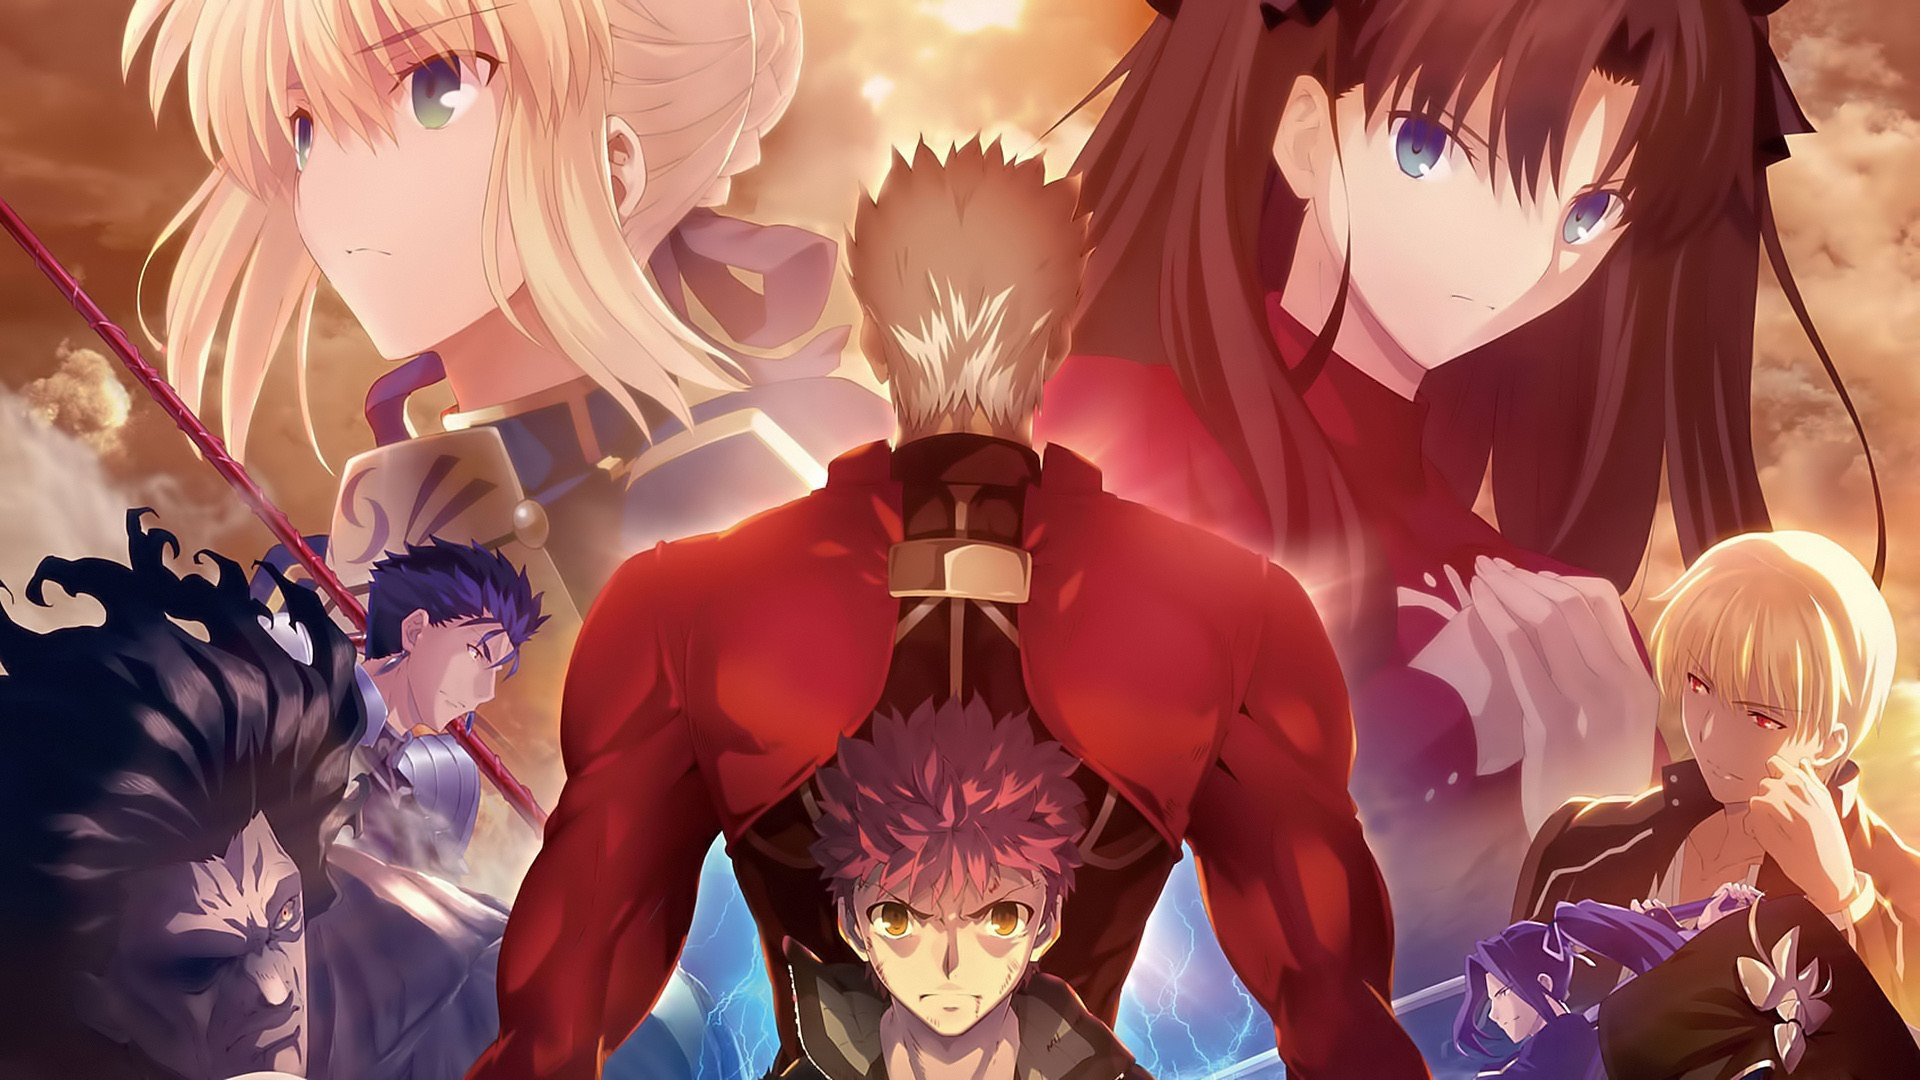 Anime – Fate/Stay Night: Unlimited Blade Works Wallpaper